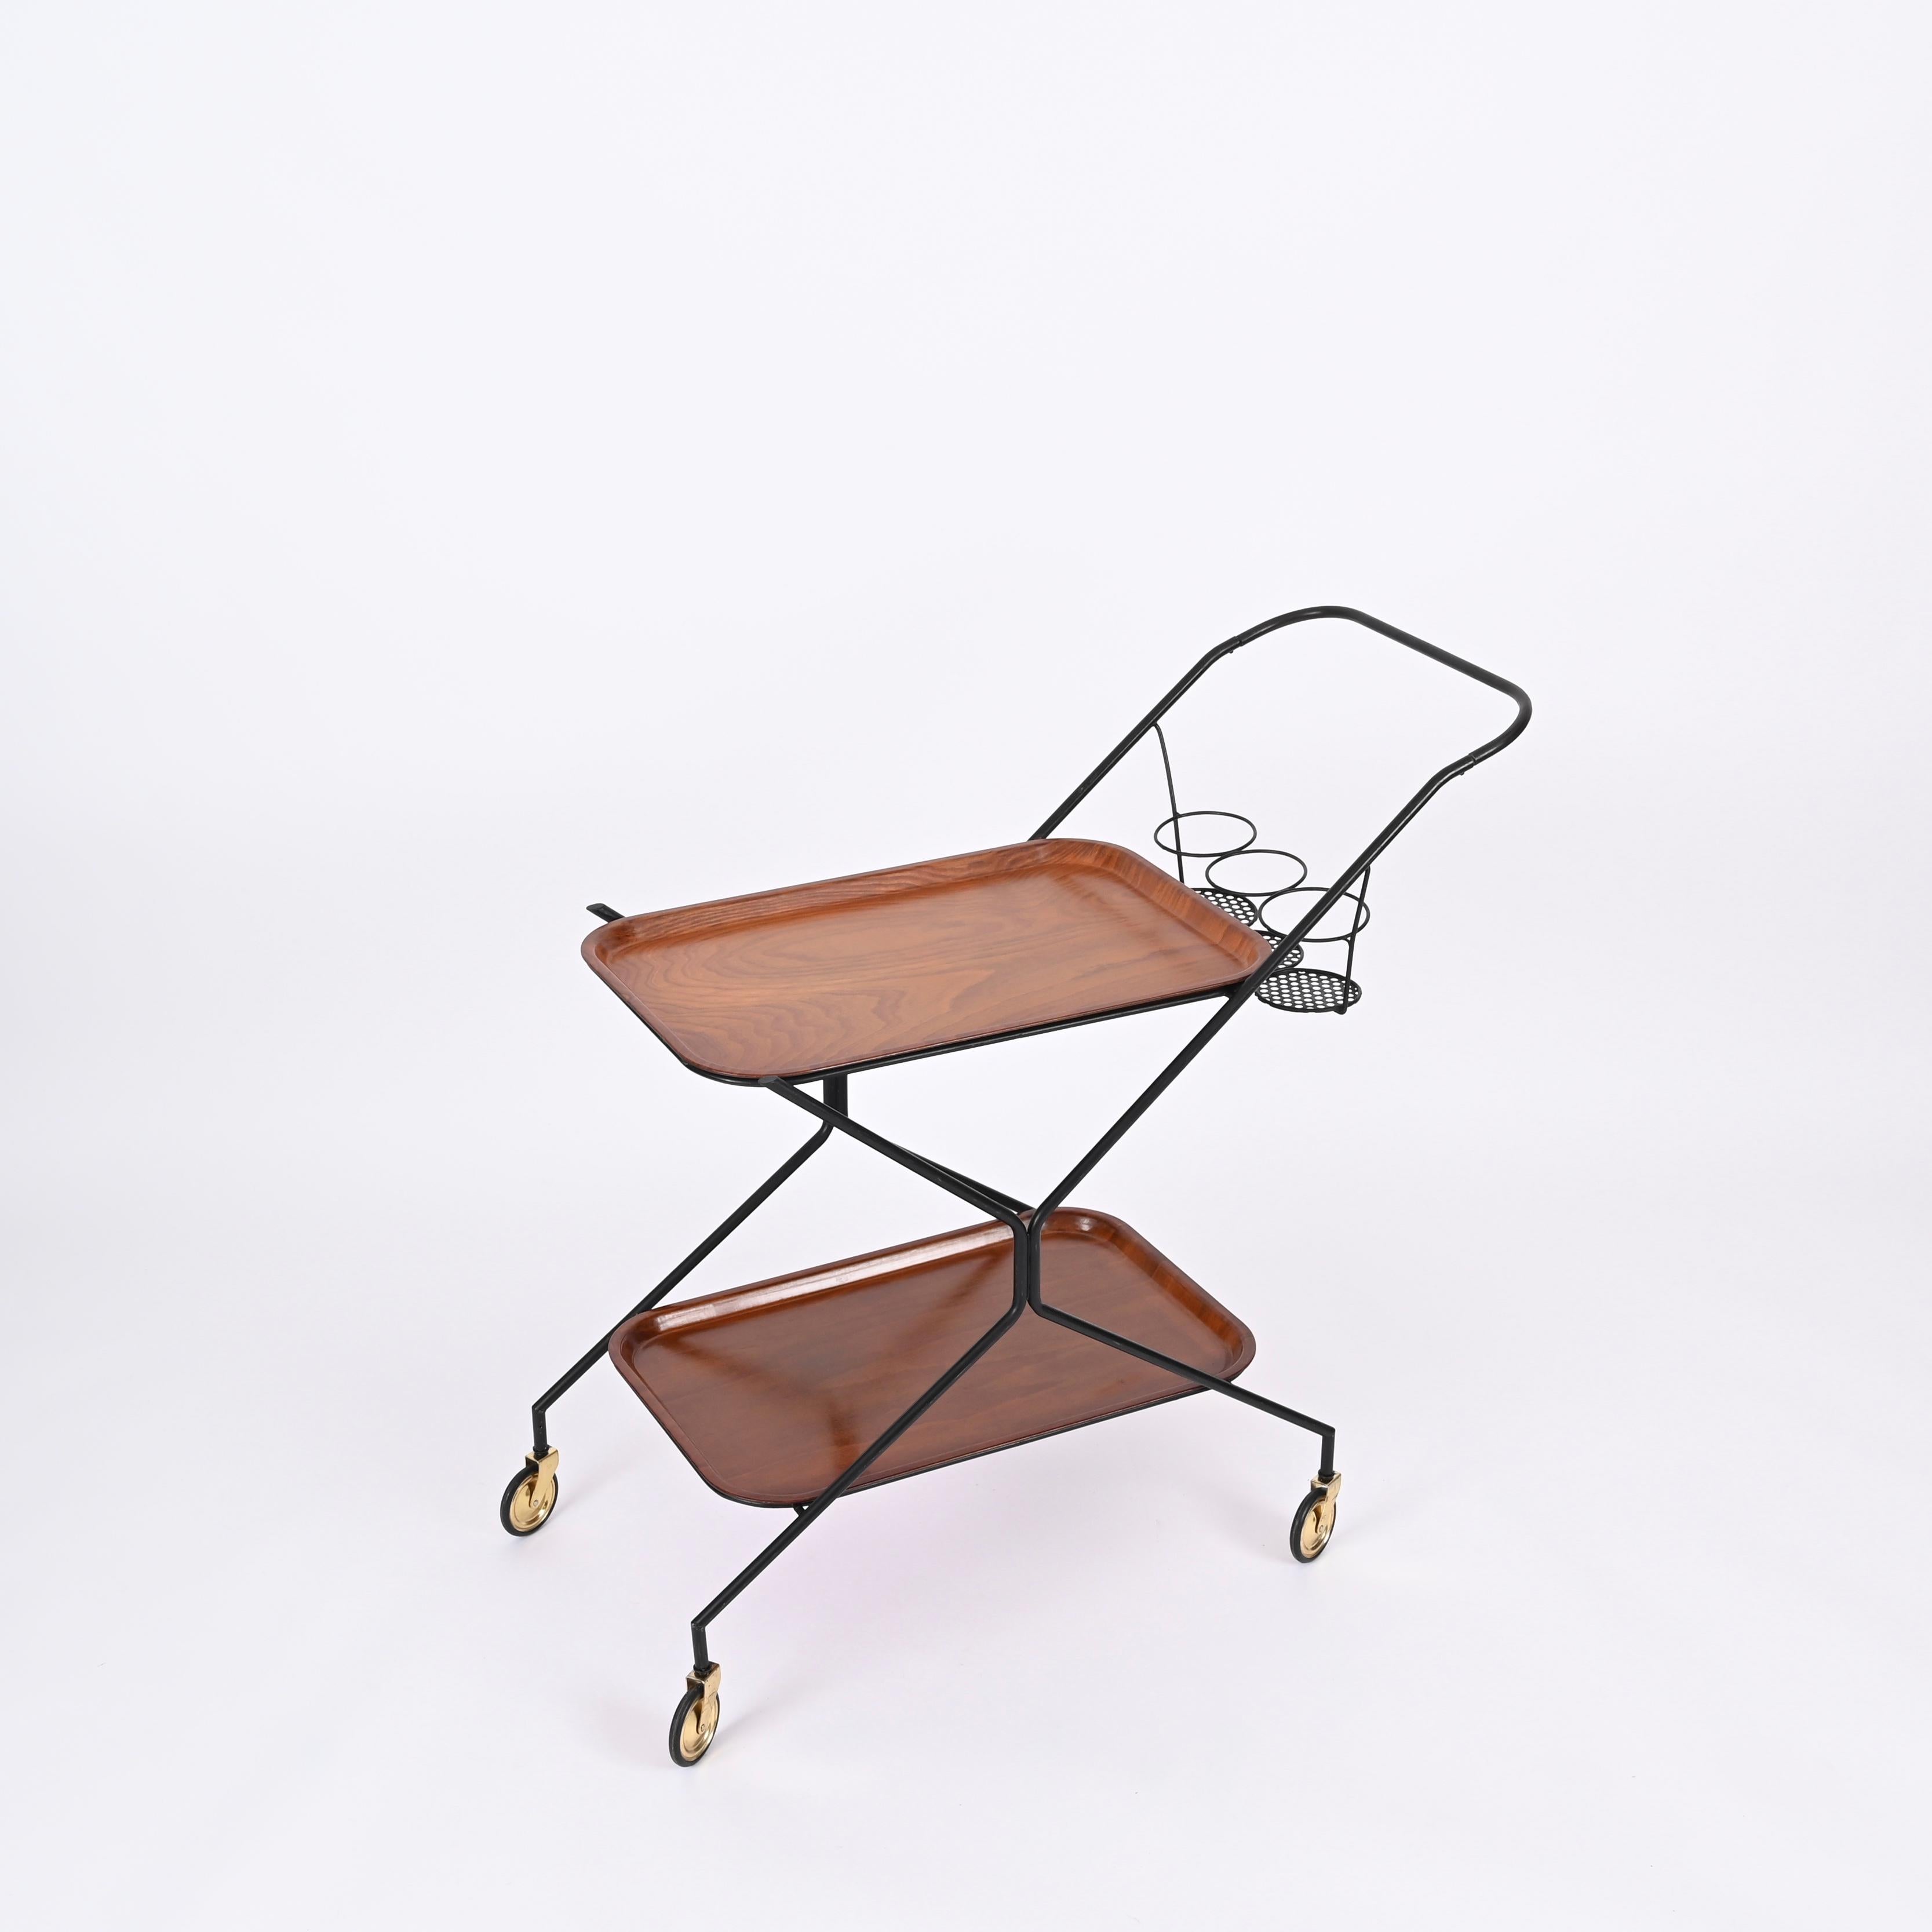 Oak Italian Serving Bar Cart with Bottle Holder, Wood, Metal and Brass, Italy, 1960s For Sale